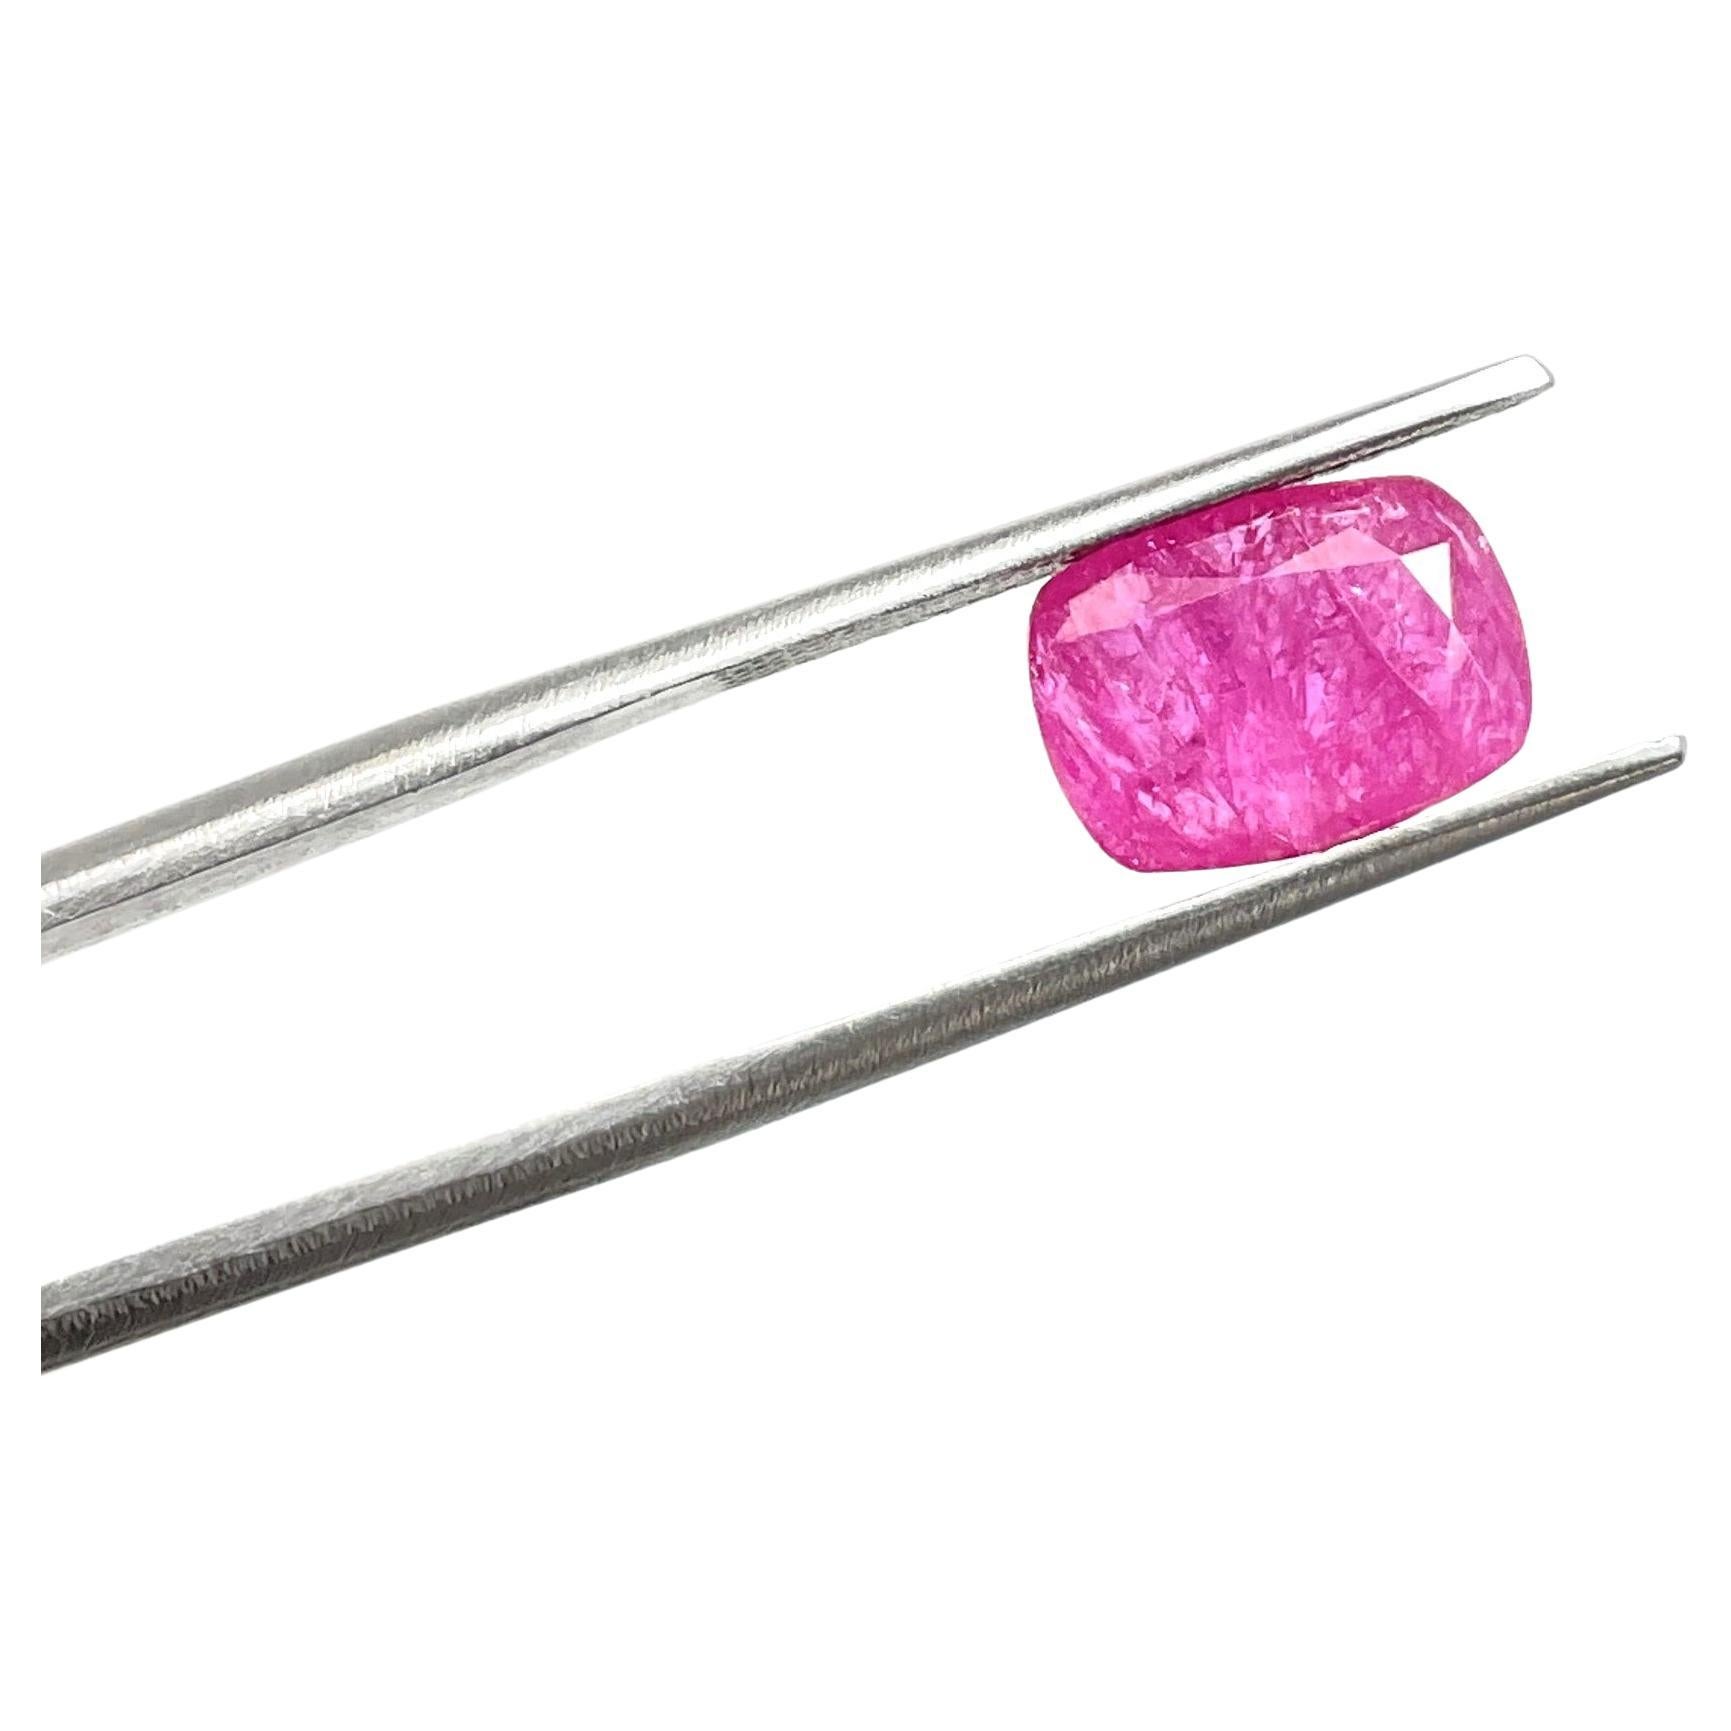 Certified 3.04 Carats Mozambique Ruby Cushion Faceted Cut stone No Heat Natural

Gemstone - Ruby
Weight: 3.04 Carats
Size: 10.6x7.78x2.96 MM
Pieces: 1
Shape: Faceted cushion cut stone